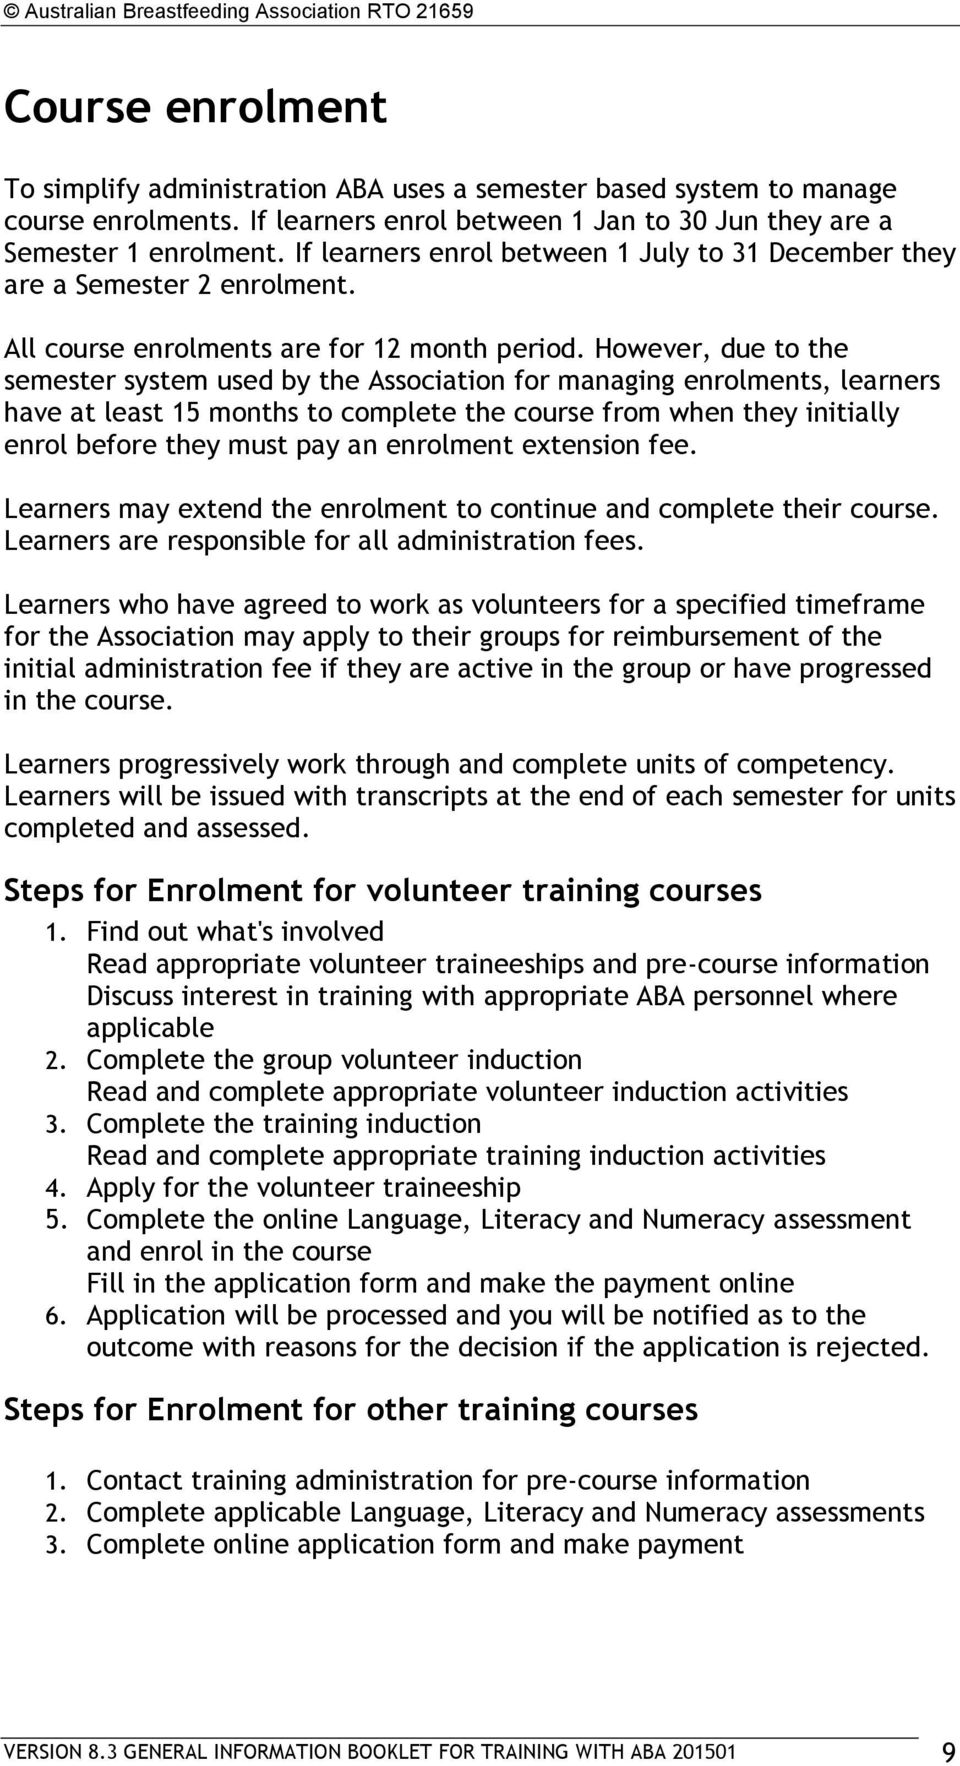 However, due to the semester system used by the Association for managing enrolments, learners have at least 15 months to complete the course from when they initially enrol before they must pay an